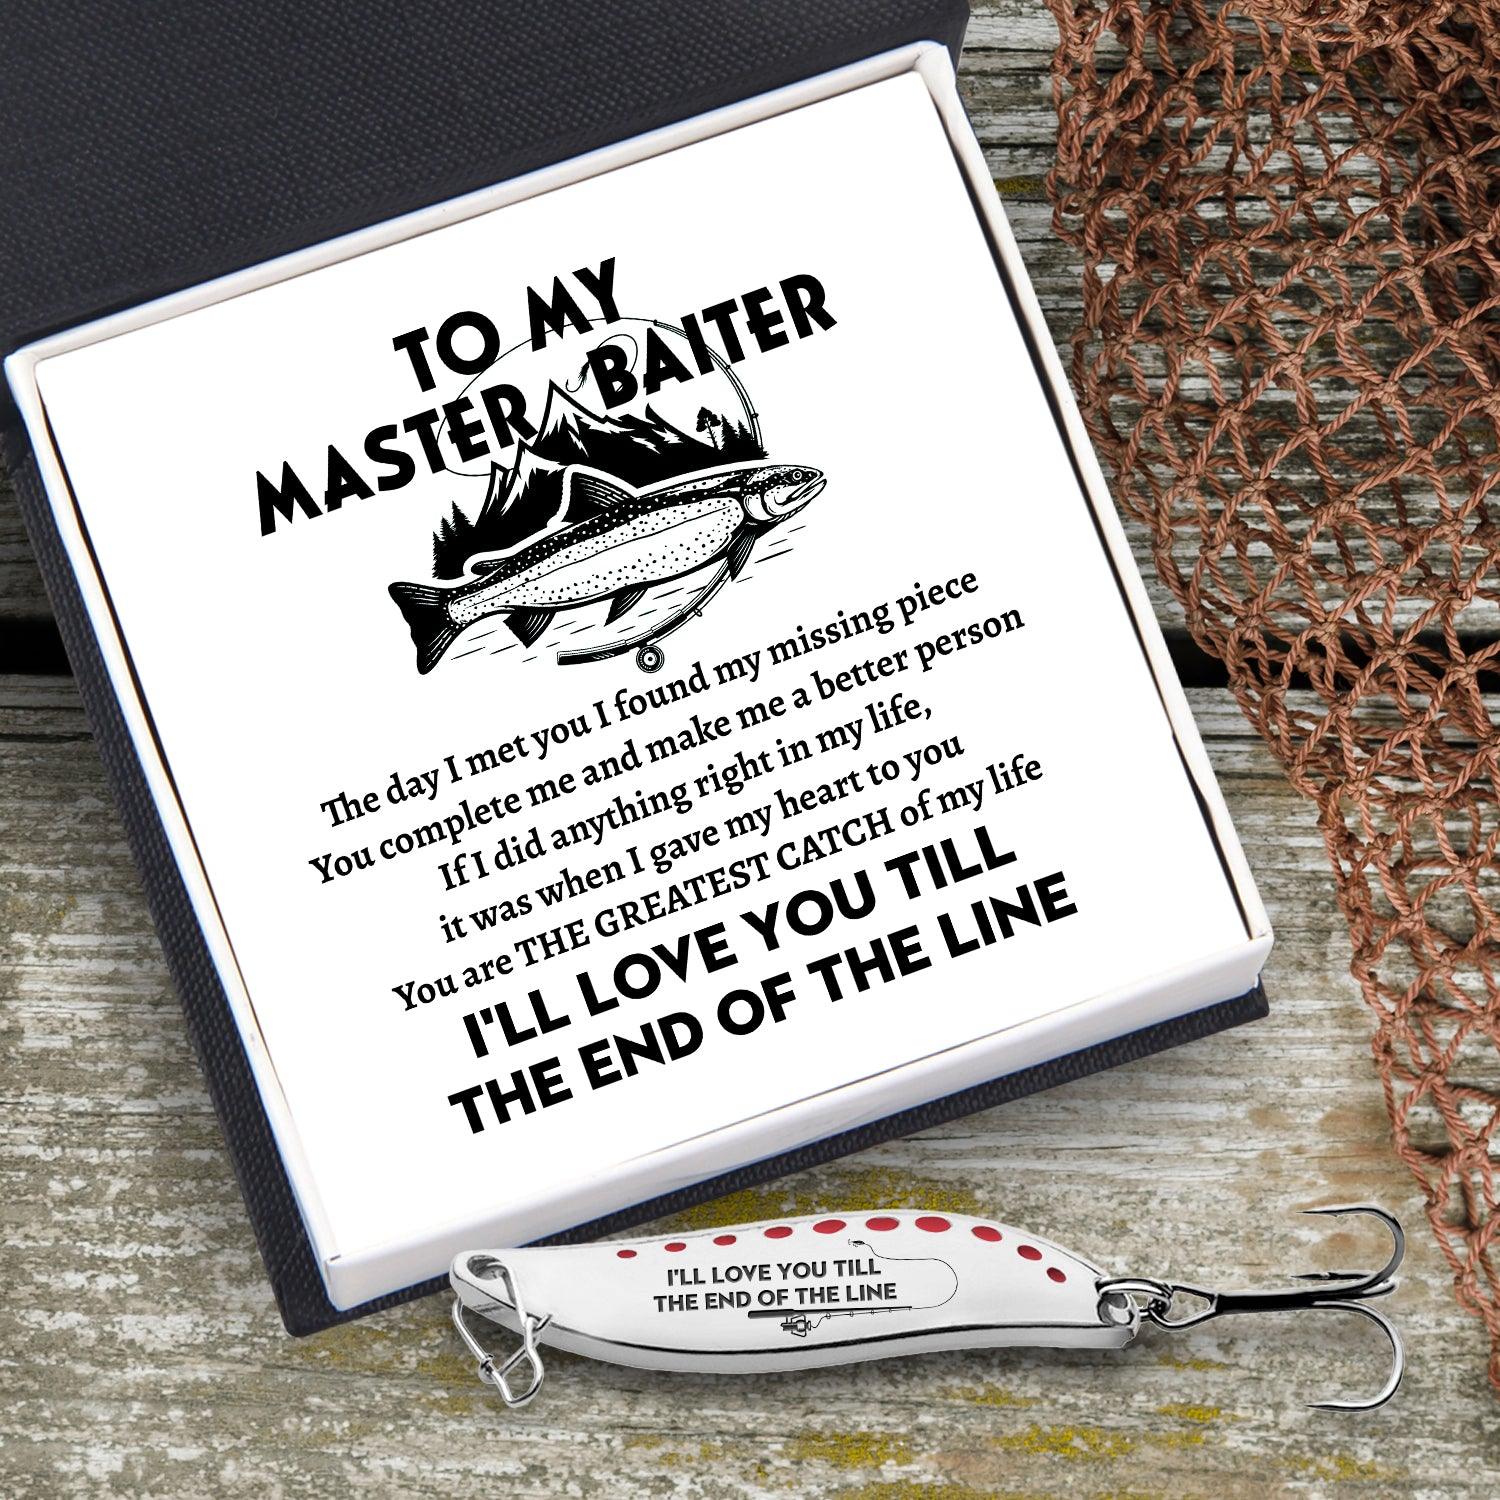 Personalised Fishing Spoon Lure - Fishing - To My Master Baiter - You -  Gifts Holder